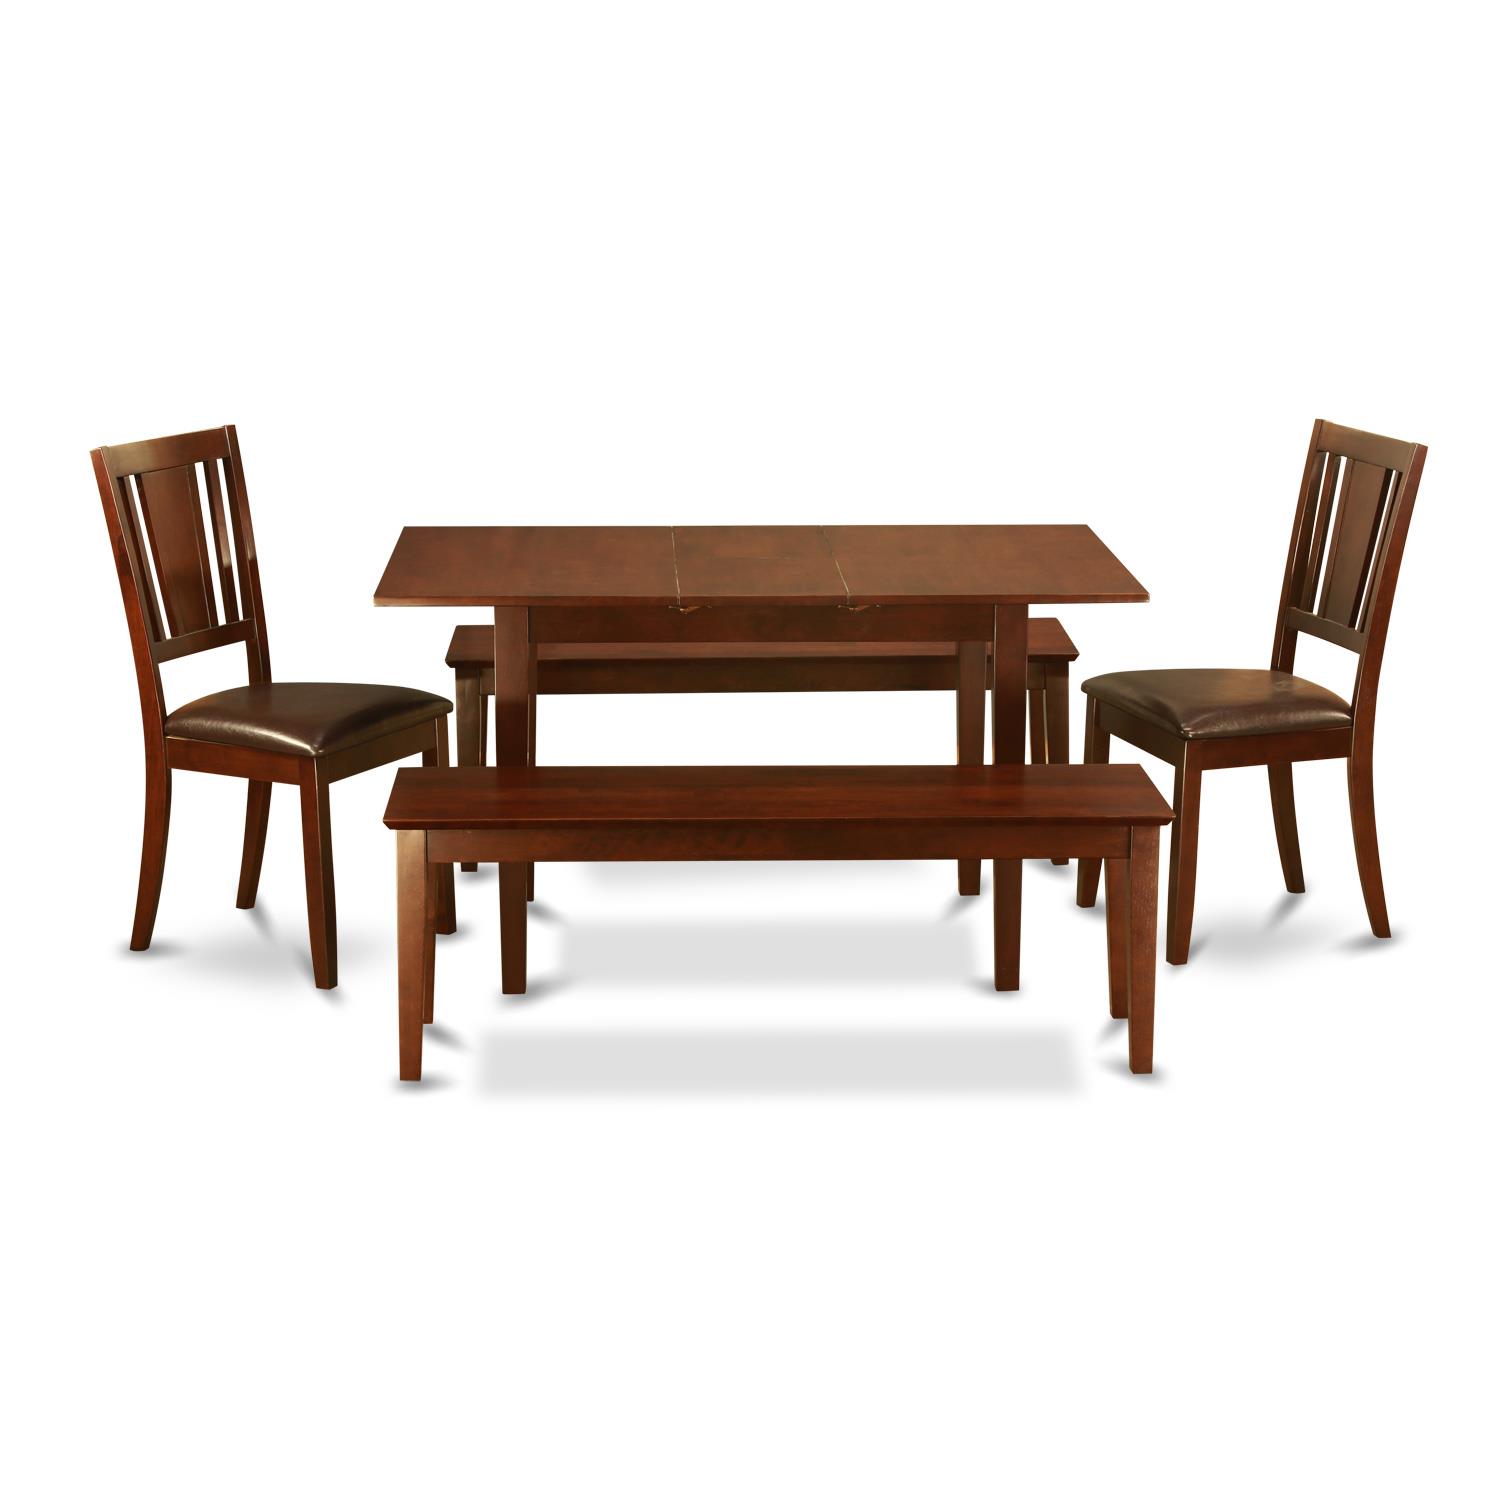 East West Furniture NODU5C-MAH-LC 5 PC Small Kitchen table set - Table with Leaf plus 2 Kichen Chairs and 2 Benches